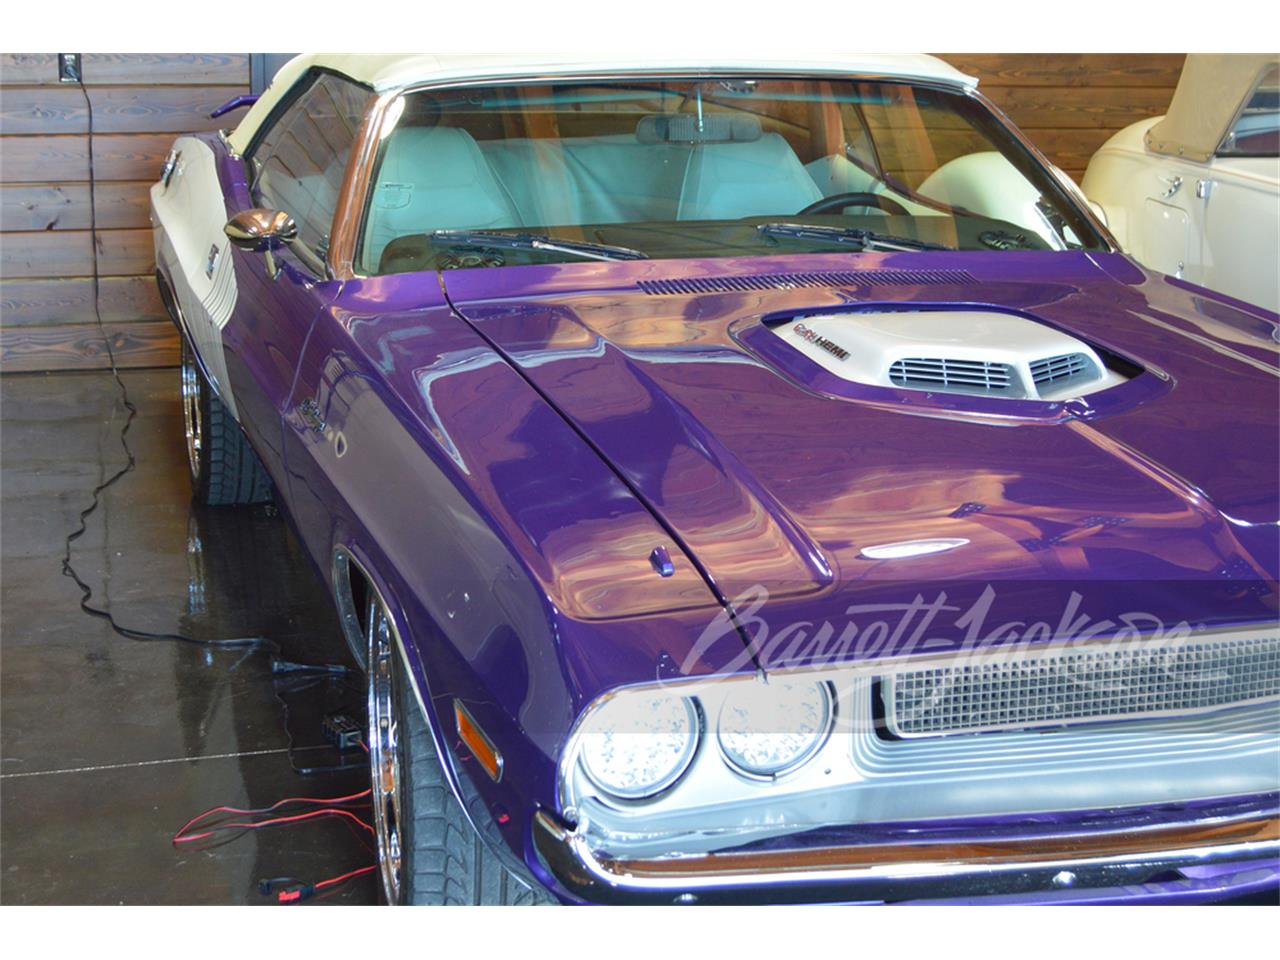 For Sale at Auction: 1970 Dodge Challenger in Scottsdale, Arizona for sale in Scottsdale, AZ